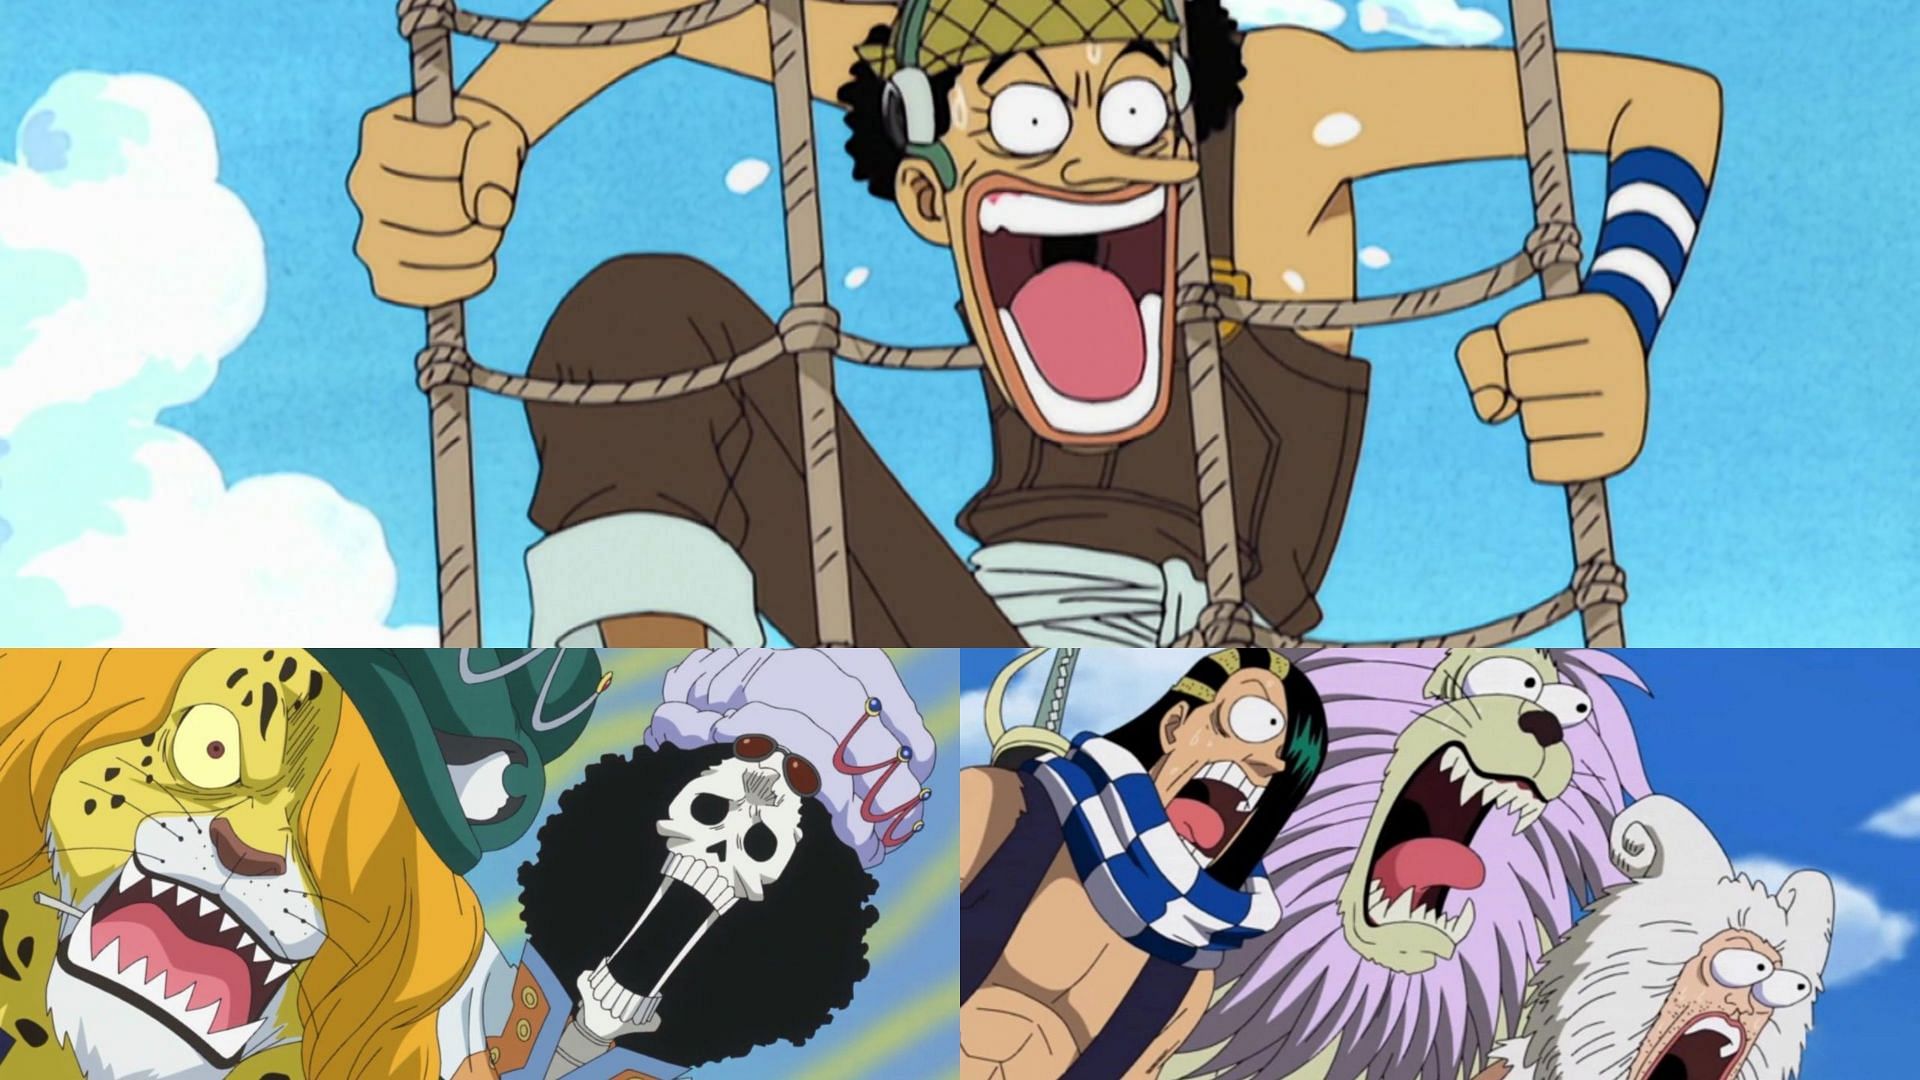 we're going to the grand line!” #anitok #onepiece #fypシ #viral #blowt, One  Piece